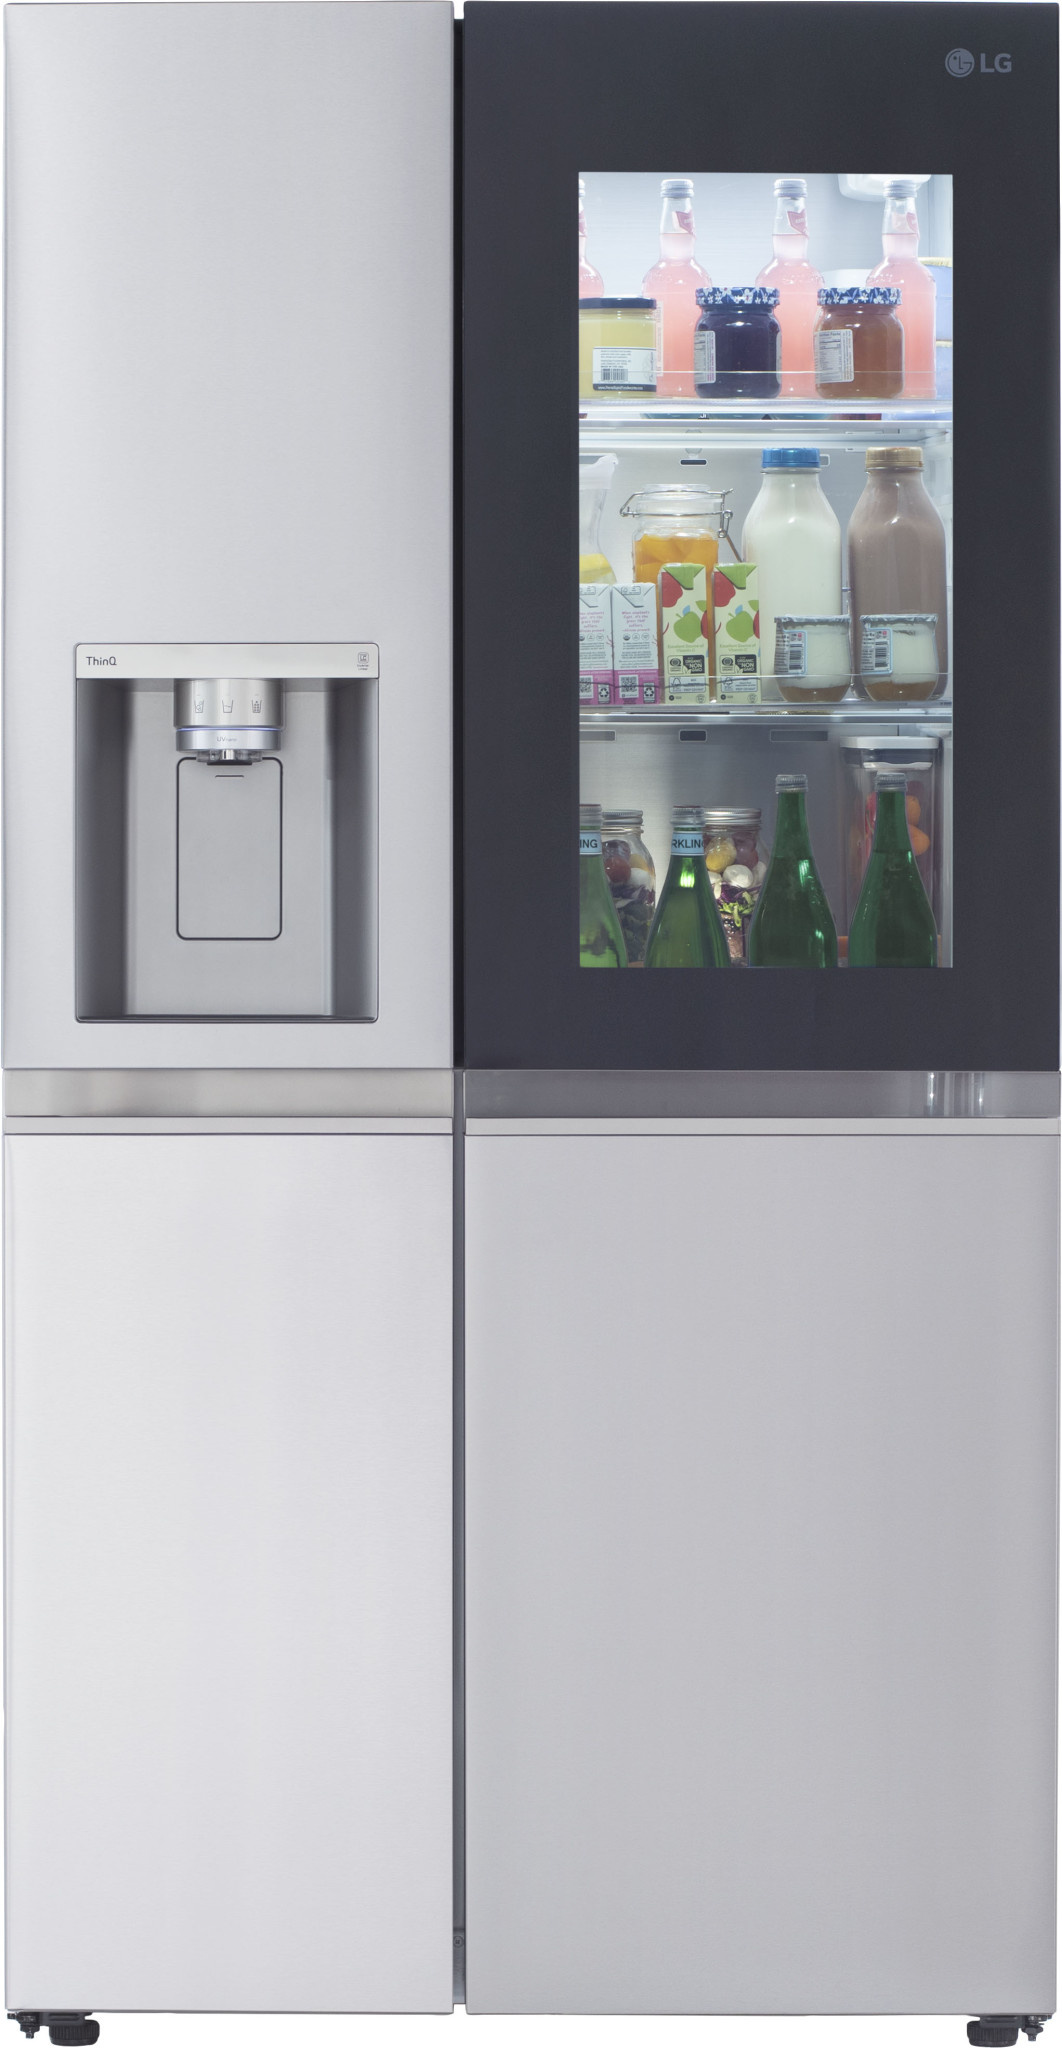 LG *LRSOS2706S 'Box' InstaView 27.1-cu ft Side-by-Side Refrigerator with Dual Ice Maker (Printproof Stainless Steel) ENERGY STAR